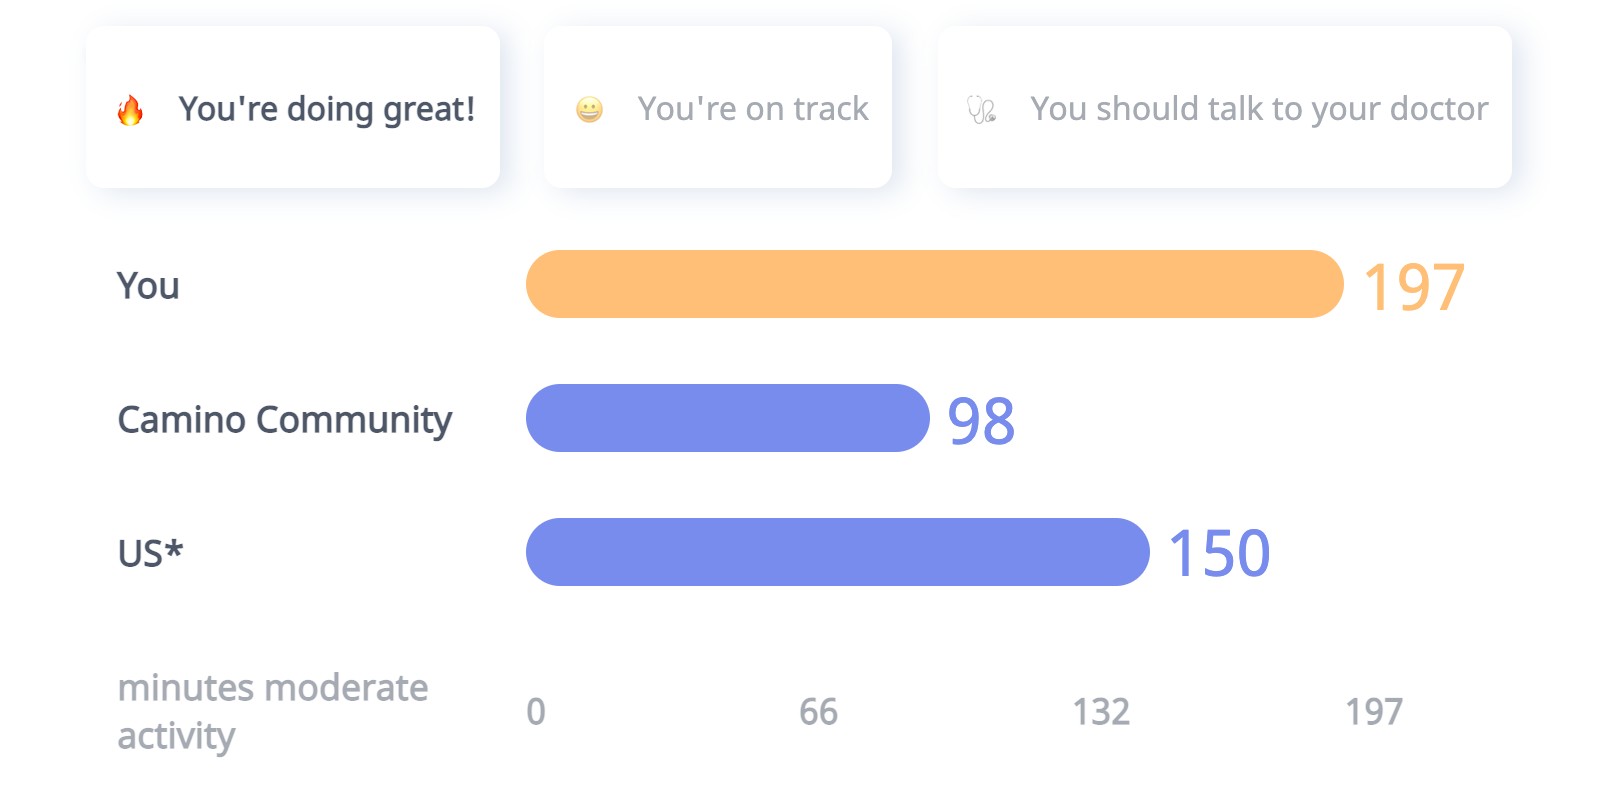 graph result minutes moderate activity - Camino